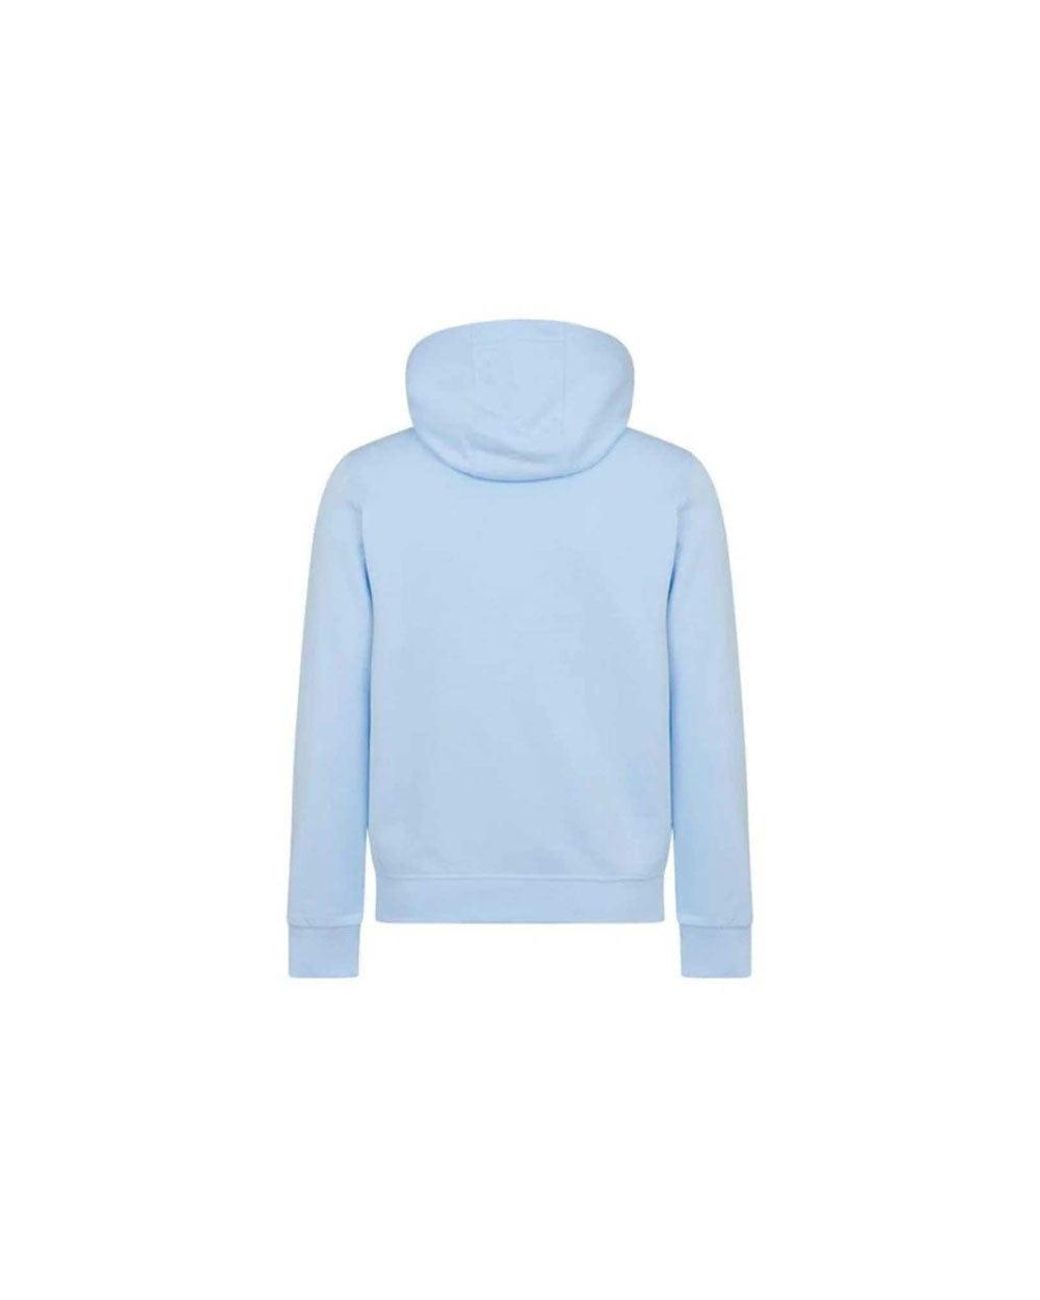 Burberry Ansdell Logo Cotton Jersey Hoodie Light Blue for Men | Lyst